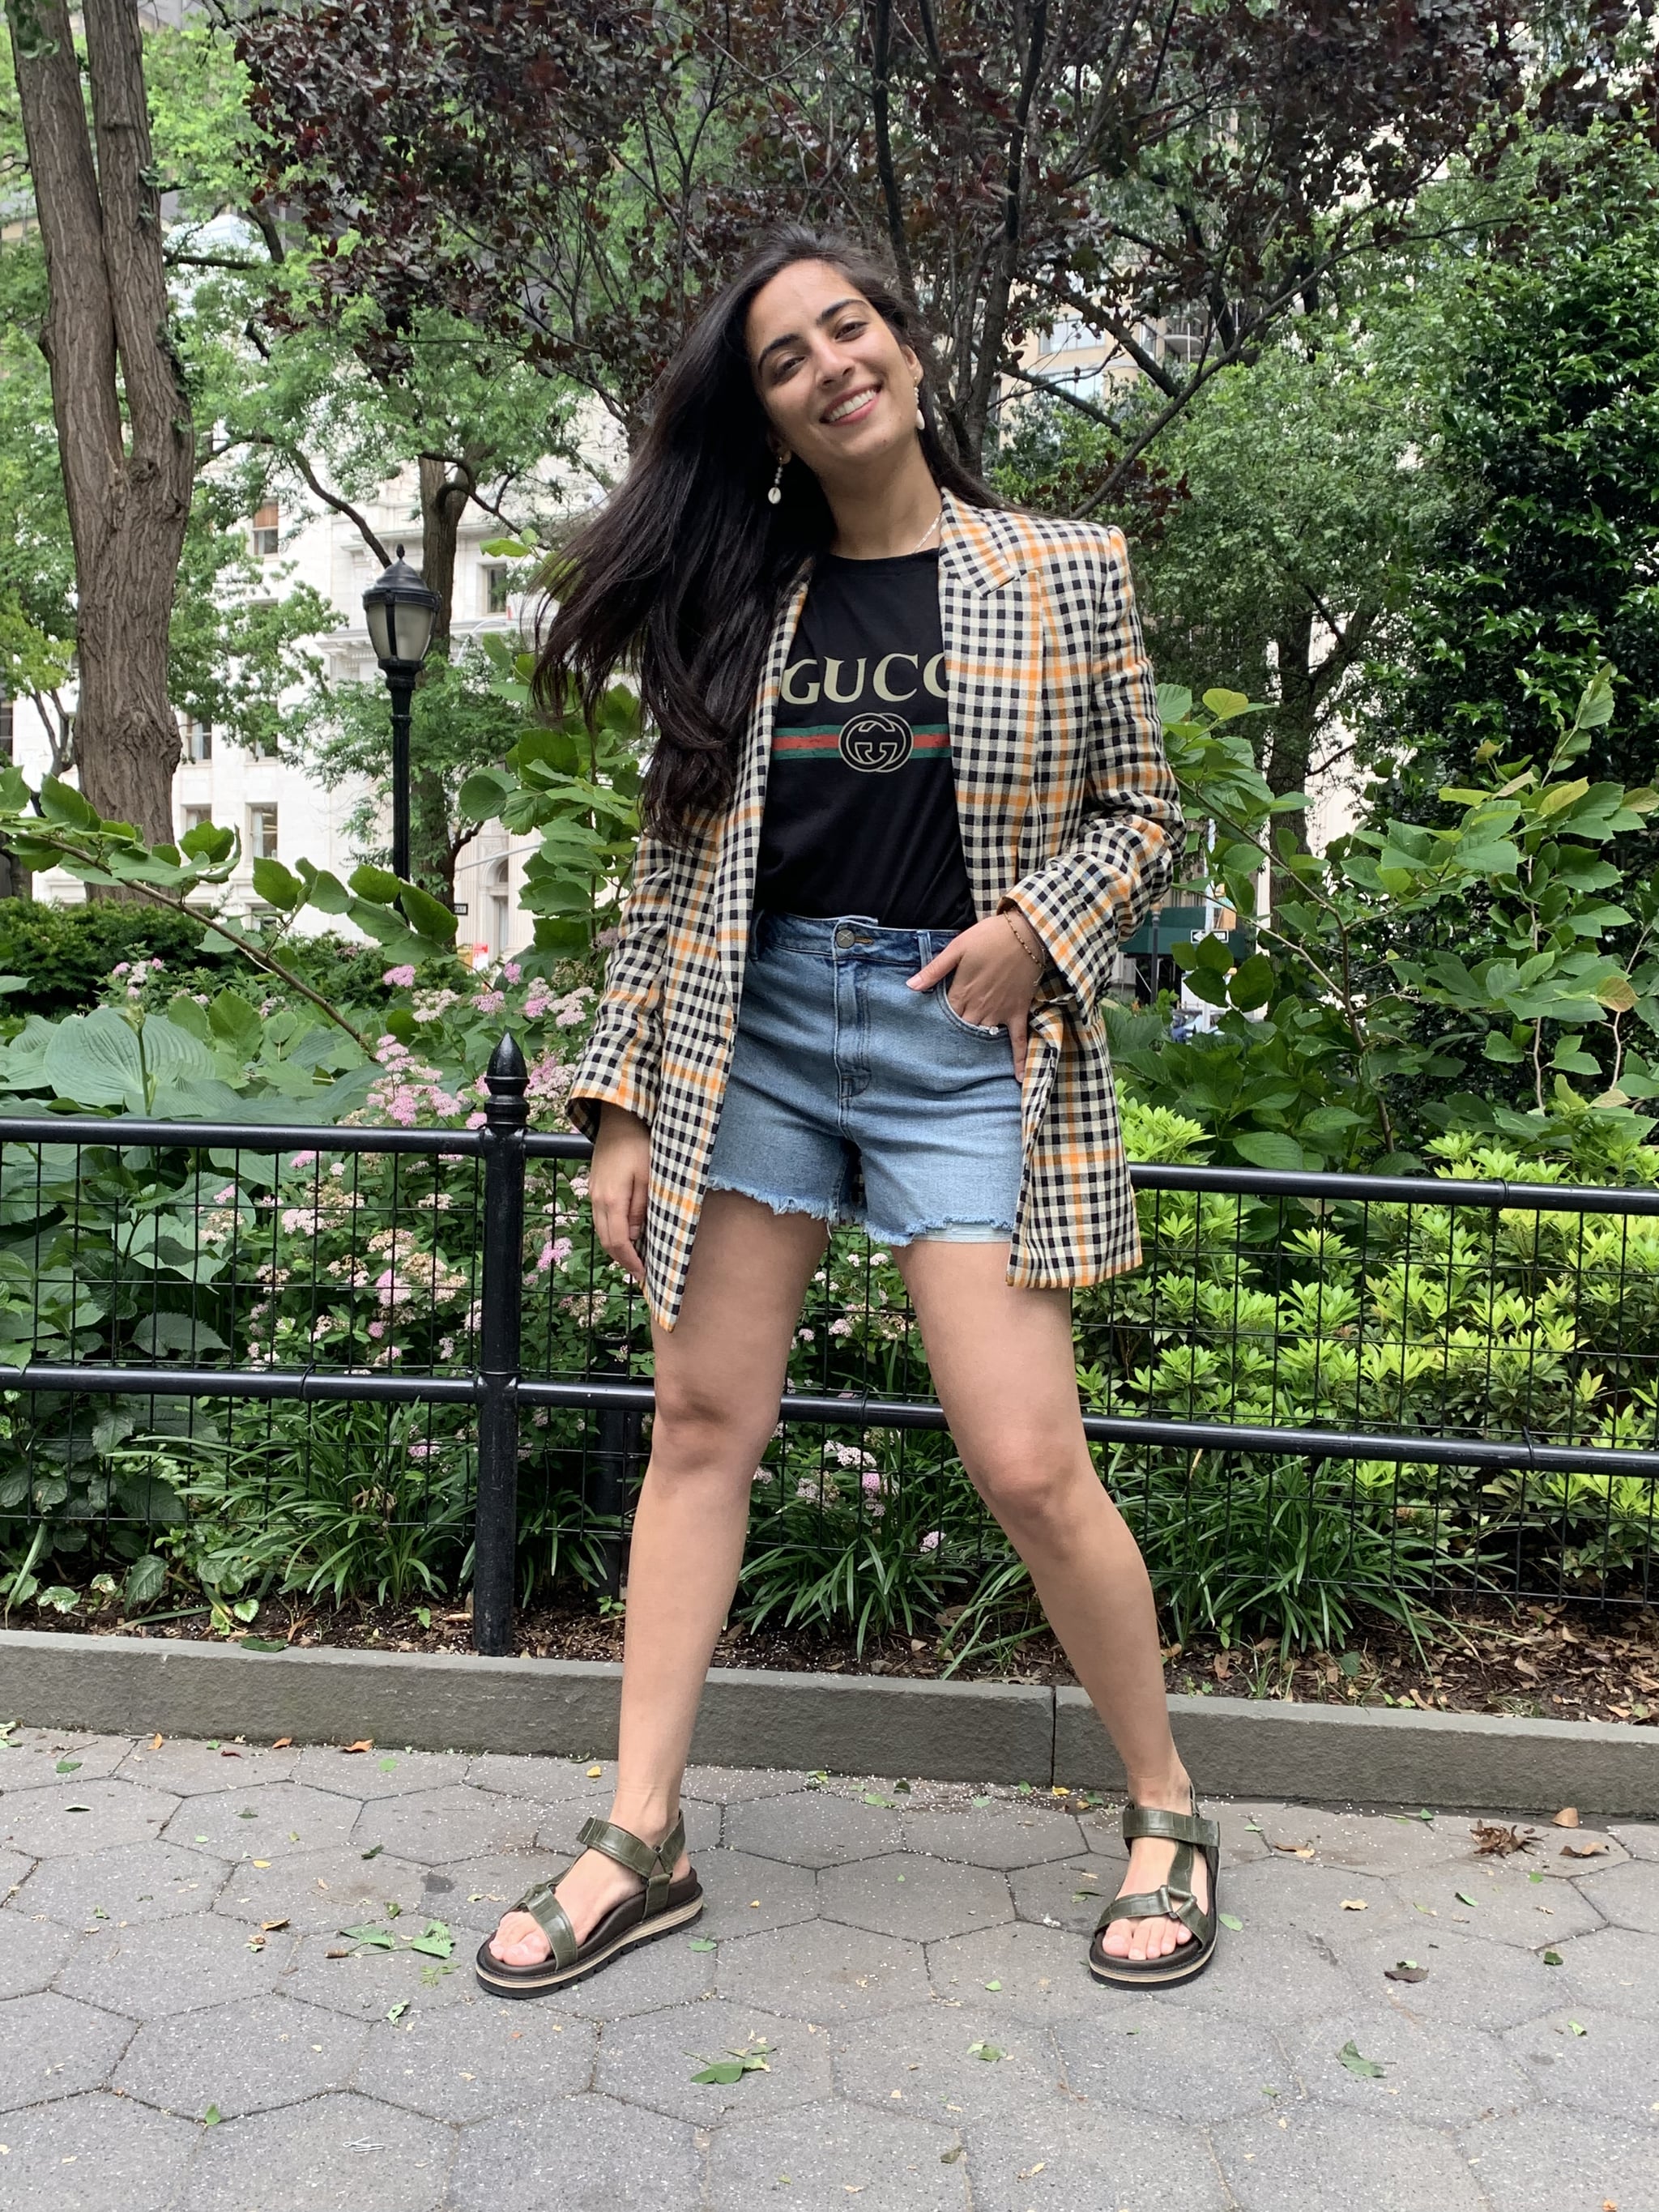 Fashion, Shopping & Style | I Styled the Gucci T-Shirt Every Celebrity Owns, and It's Most Definitely Worth the Hype | POPSUGAR Photo 16